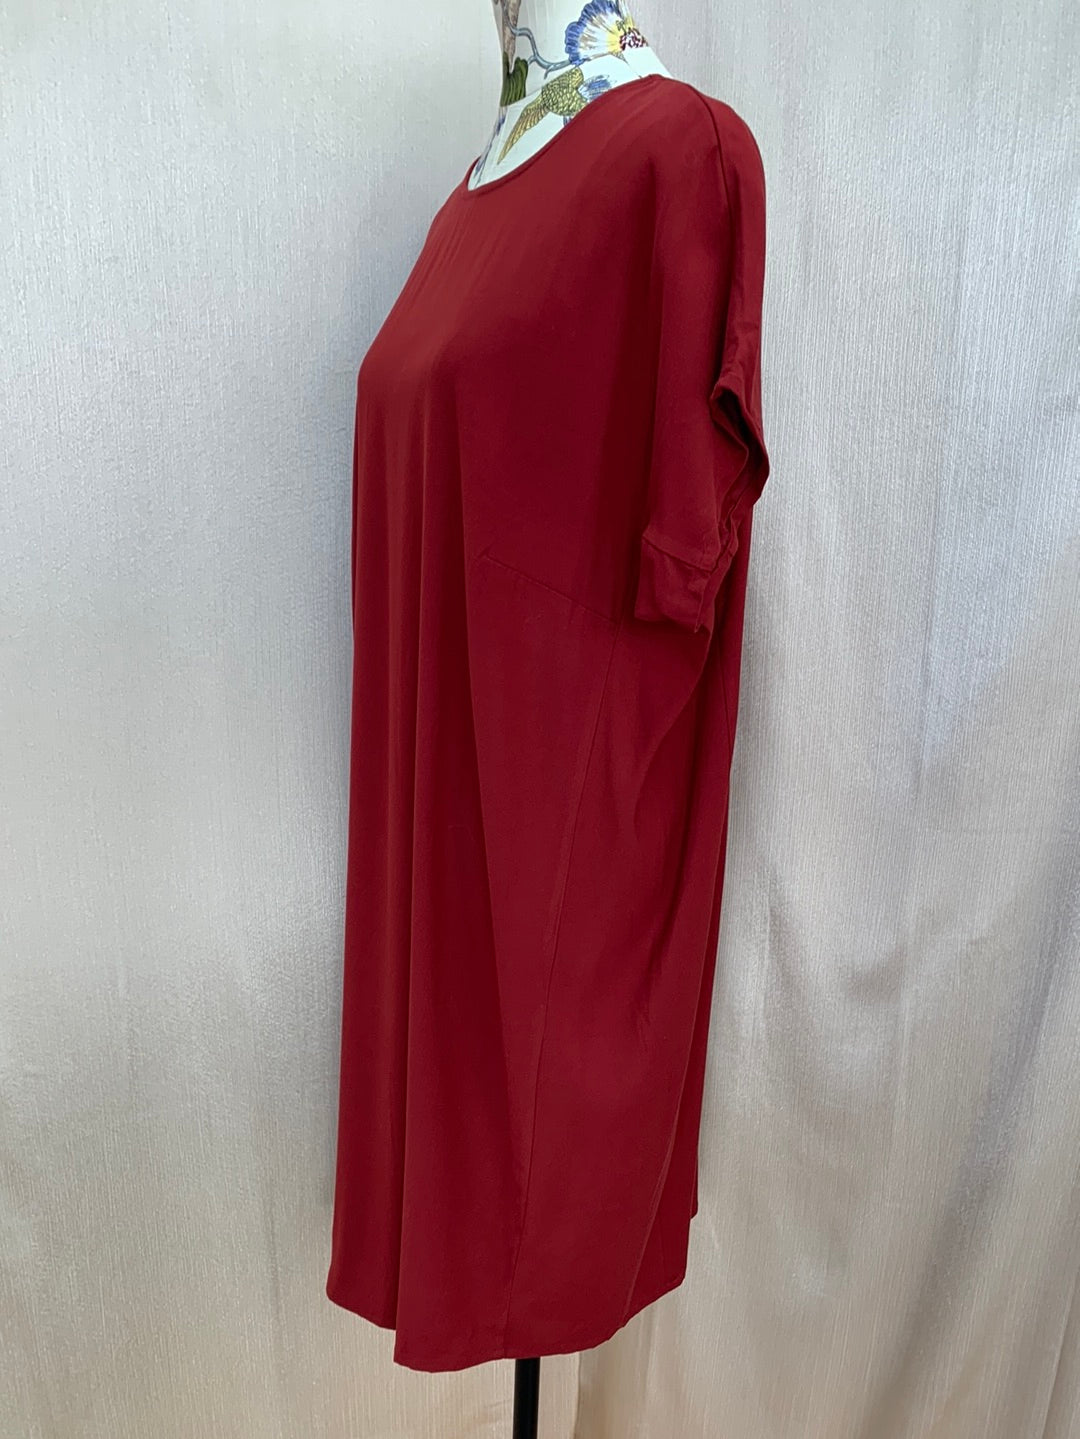 NWT - UNIVERSAL STANDARD sangria red Isabelle Twill Sheath Dress - M | 18-20